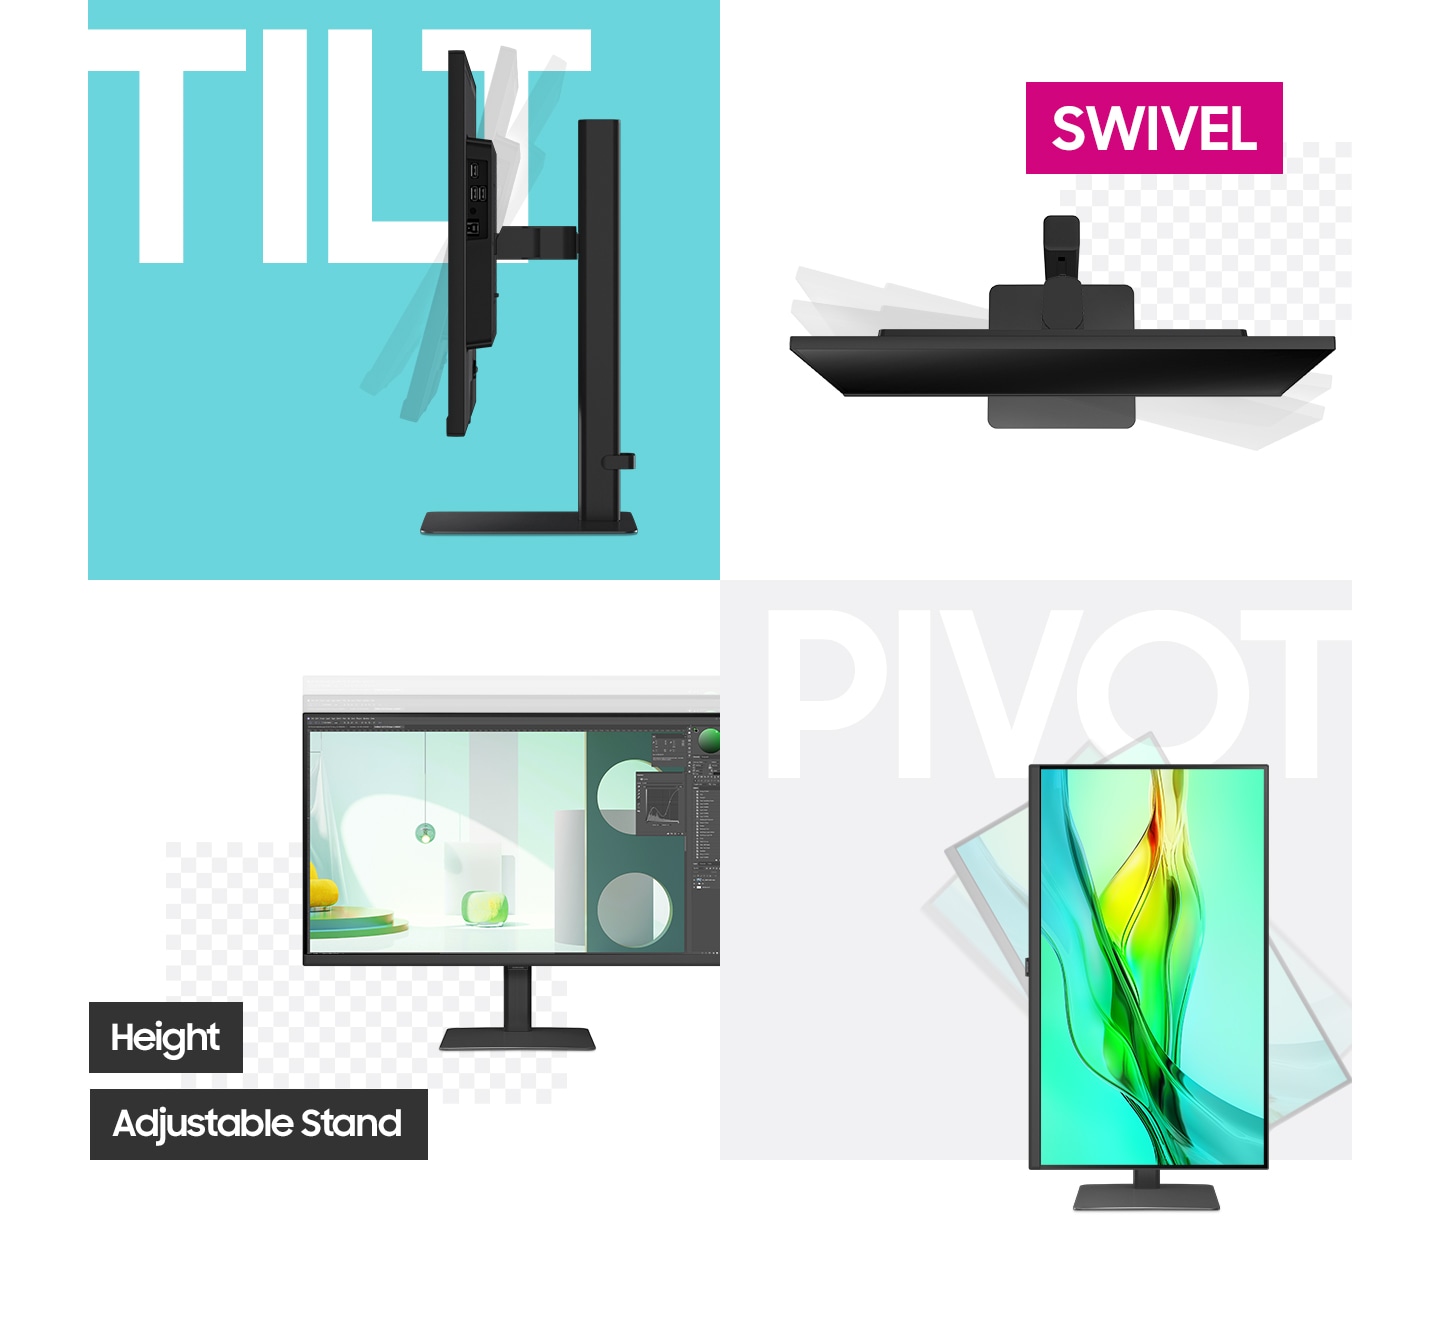 In the top left of a grid, the monitor is shown from the side, with the text "TILT" next to it. The monitor head is shown tilting. The top right of the grid shows the monitor from the top down with the word "Swivel" next to it. The monitor is shown swiveling. The bottom left of the grid shows the front of the monitor on its stand, reading "Height Adjustable Stand." The bottom right of the grid shows the montor in verital orientation, with the text "Pivot" above it.